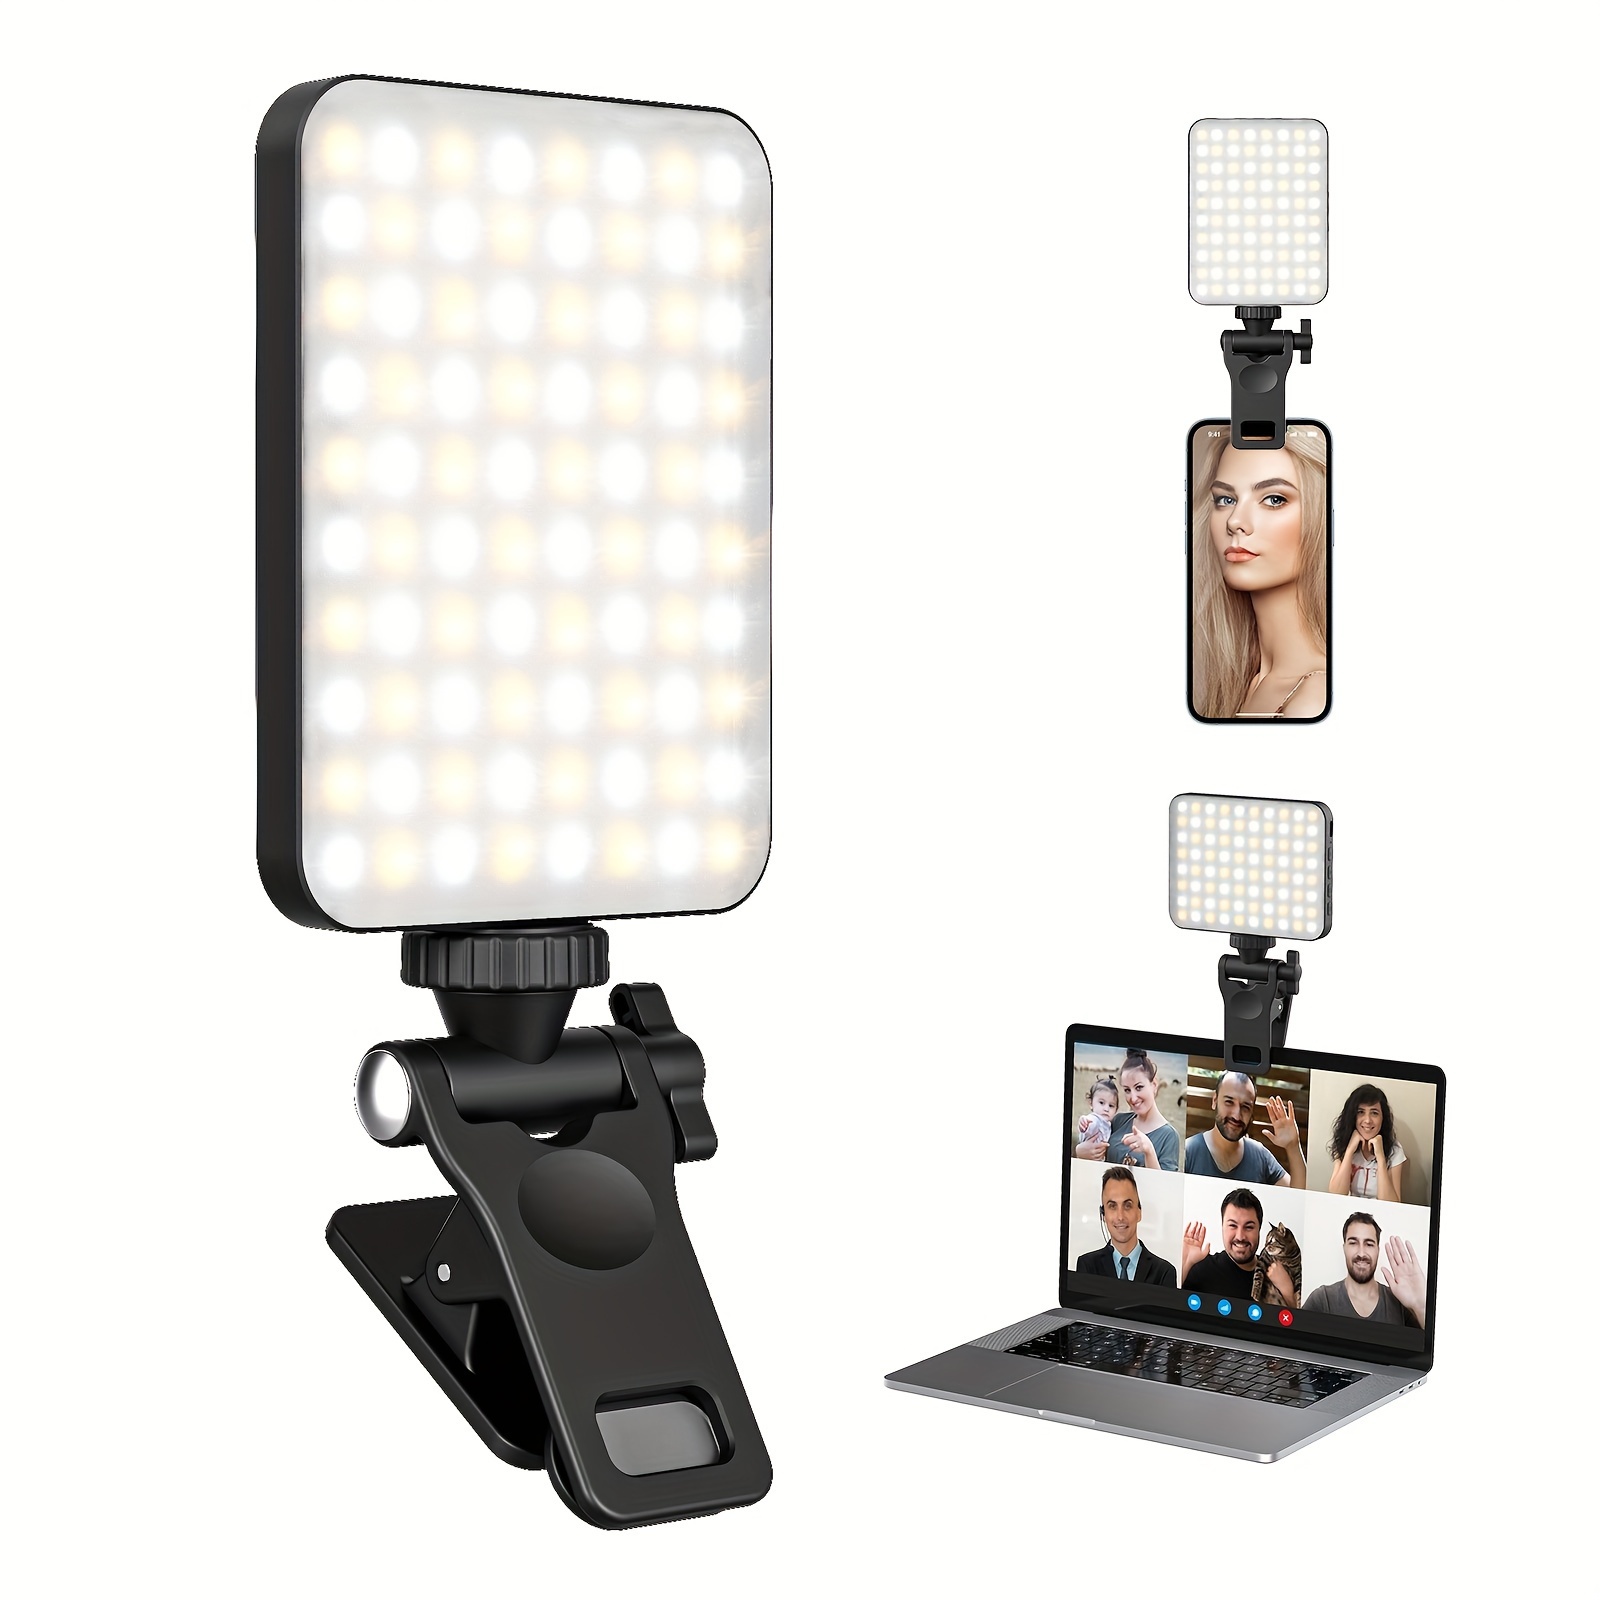 

Rechargeable Selfie Light, Clip Fill Light For Phone Laptop Tablet Portable Light For Video Conference Live Streaming Zoom Call Makeup Picture (black)